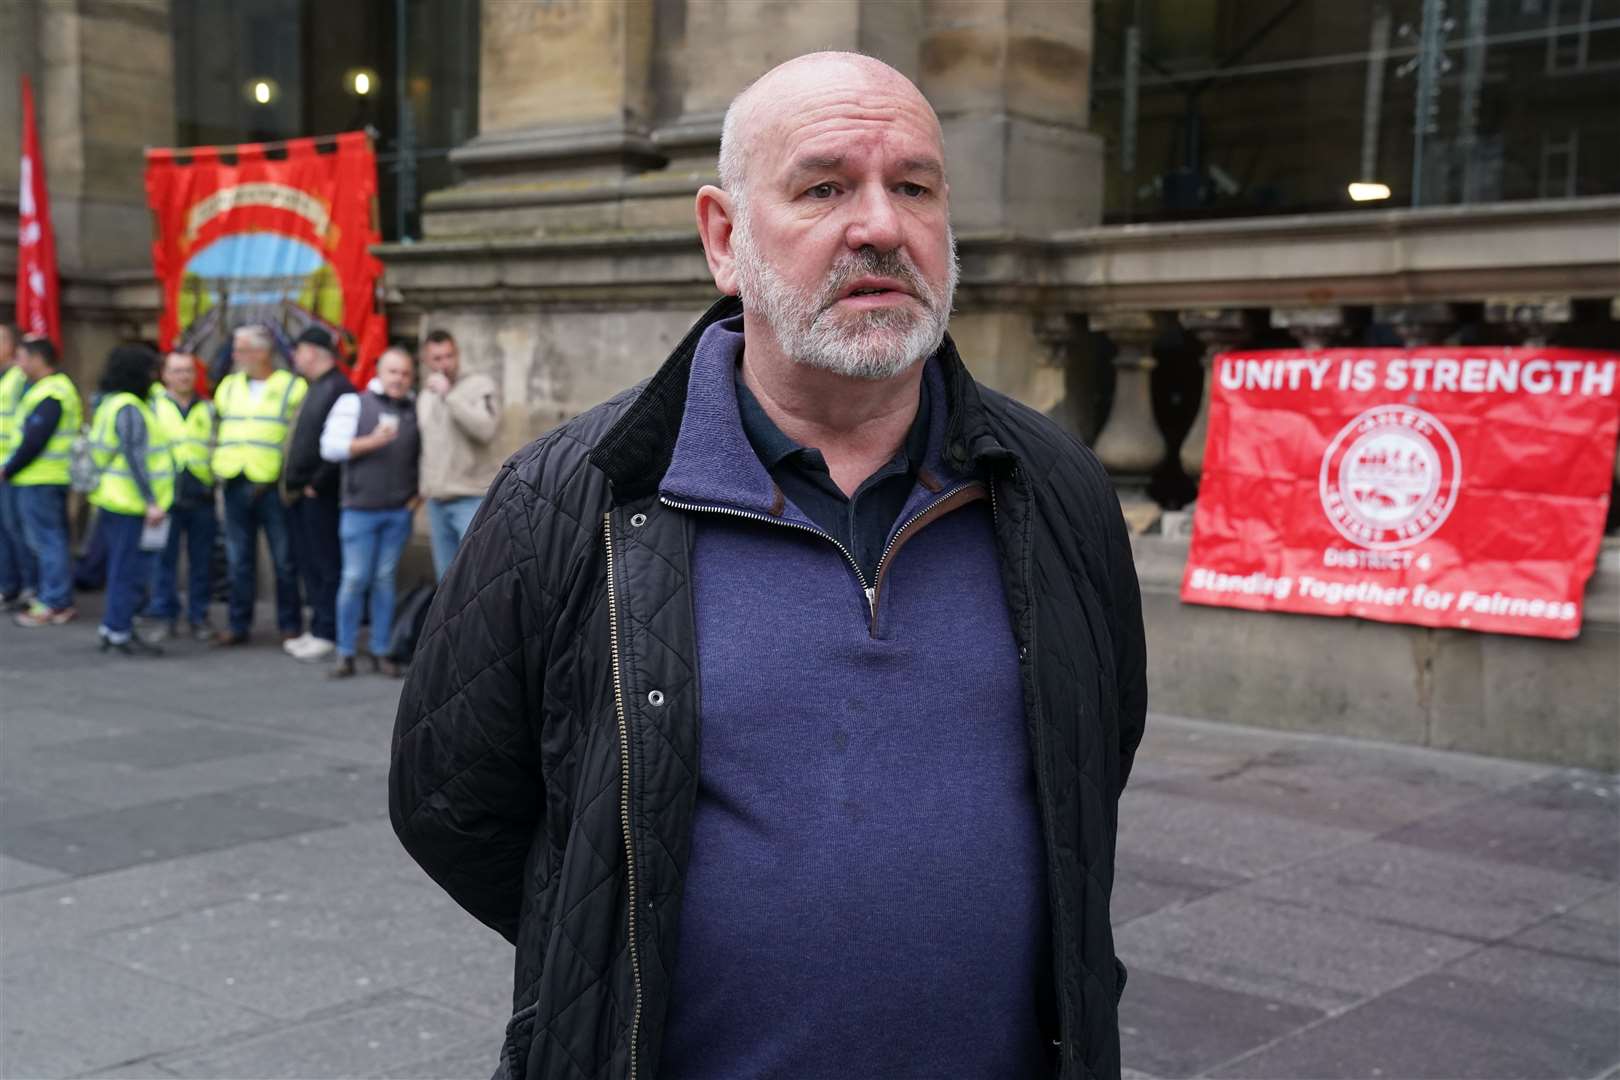 Aslef leader Mick Whelan with union members on the picket line outside Newcastle station on Wednesday (Owen Humphreys/PA)